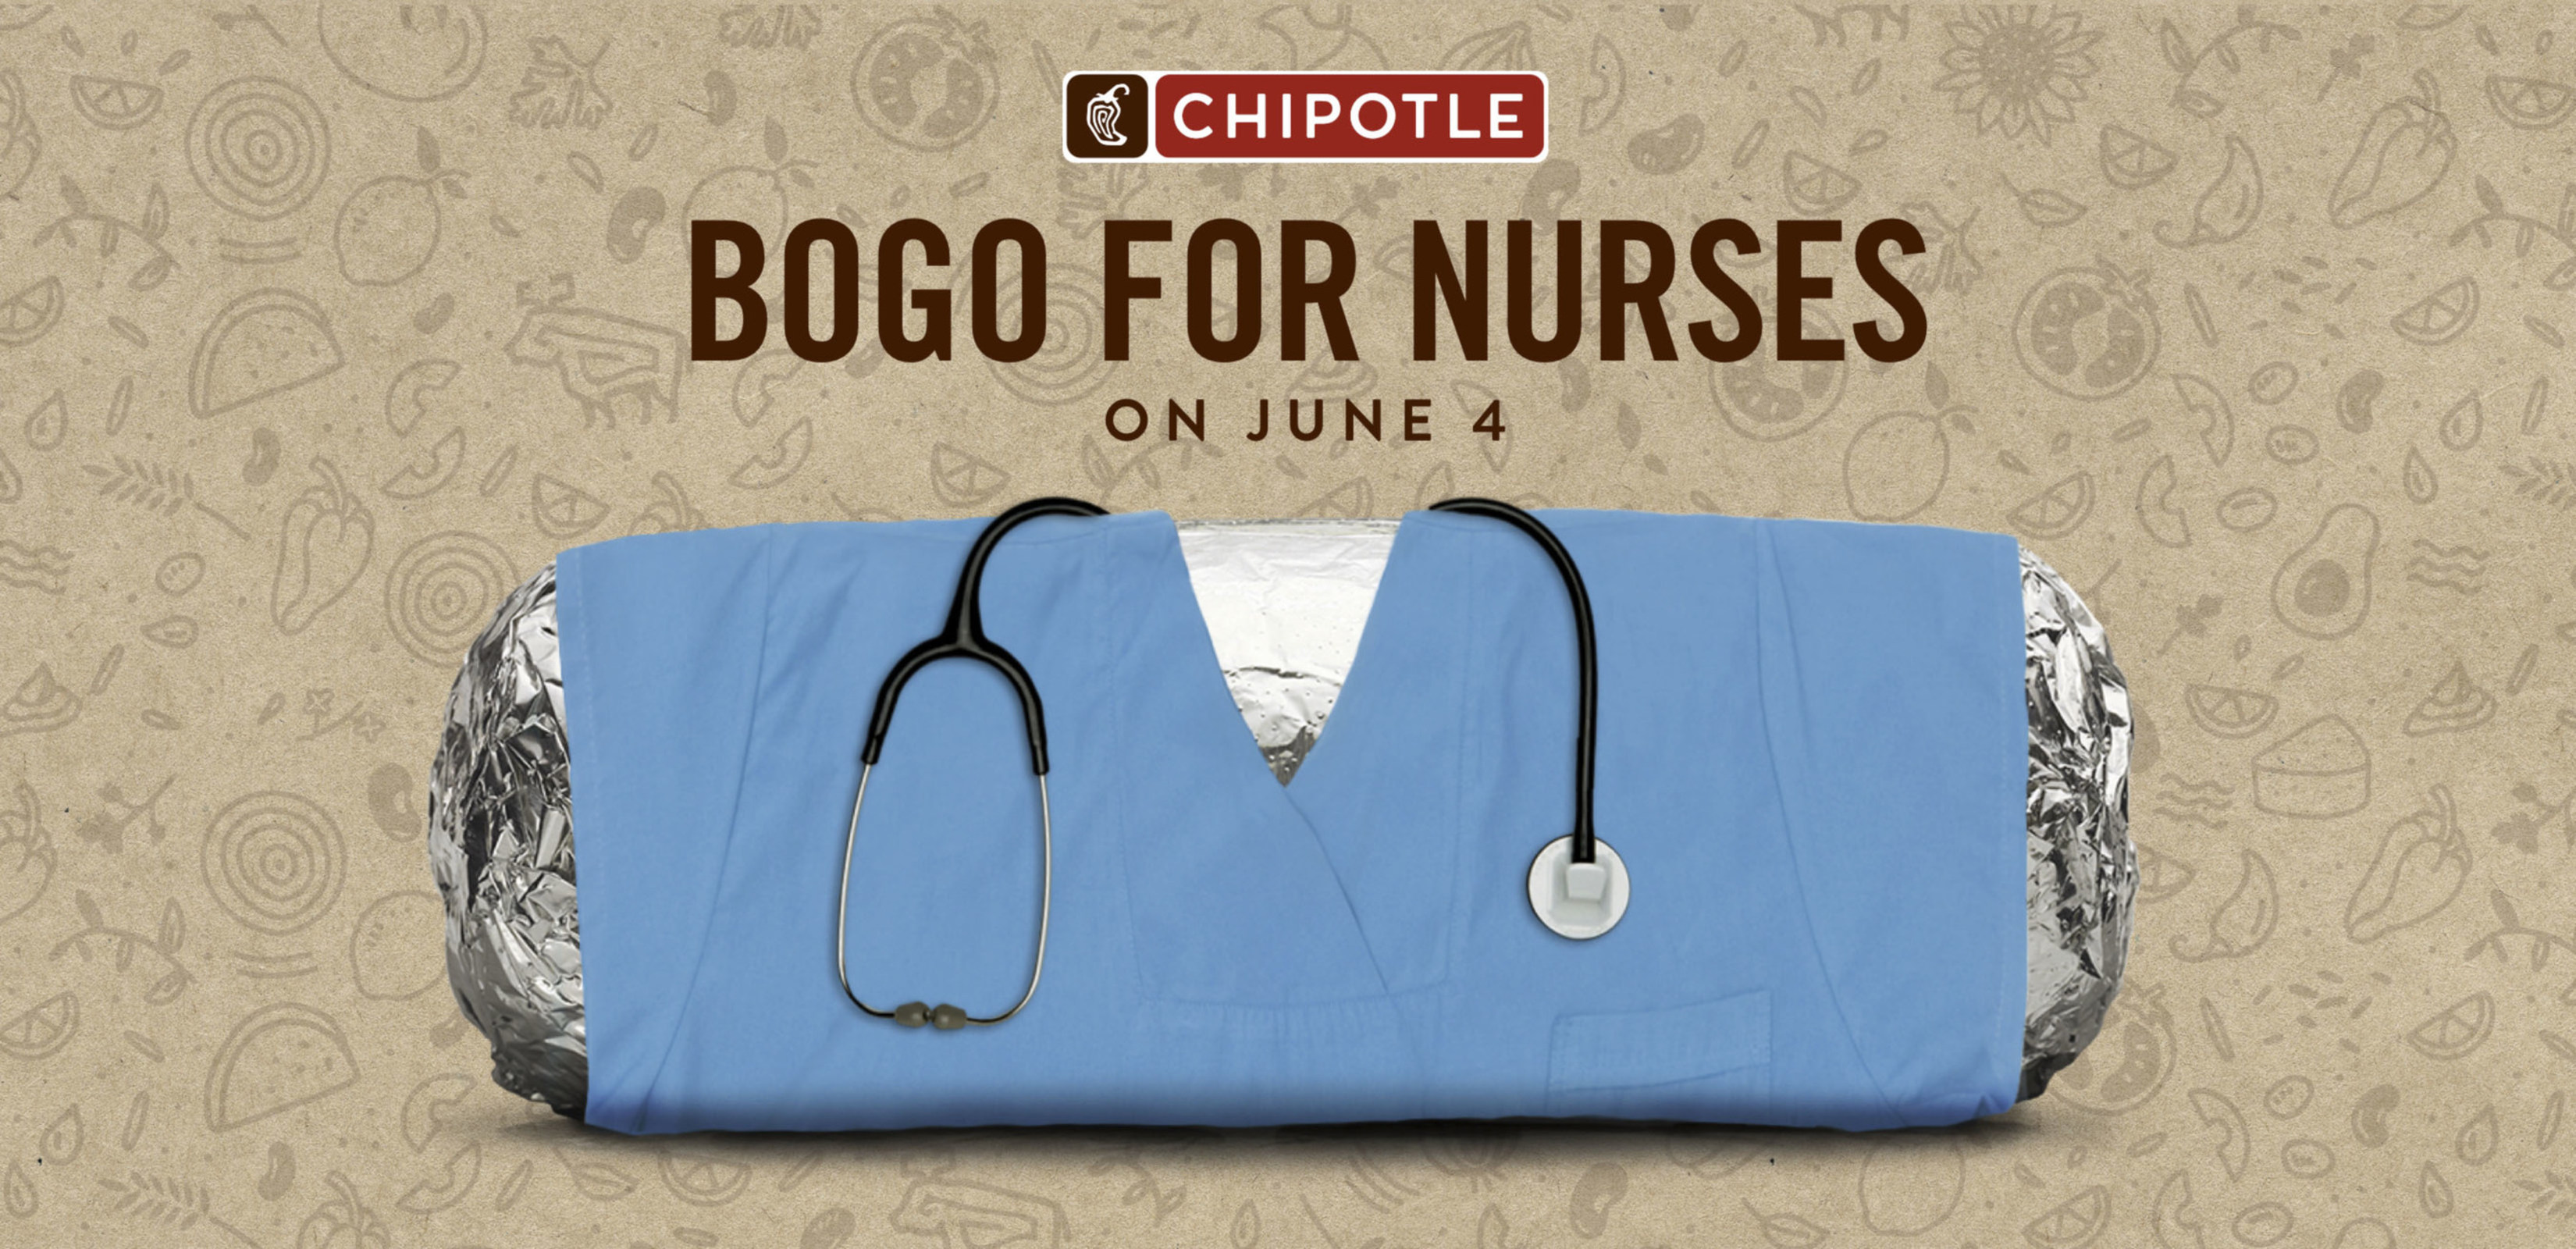 Chipotle Offers Buy-One-Get-One Free Deal for Nurses